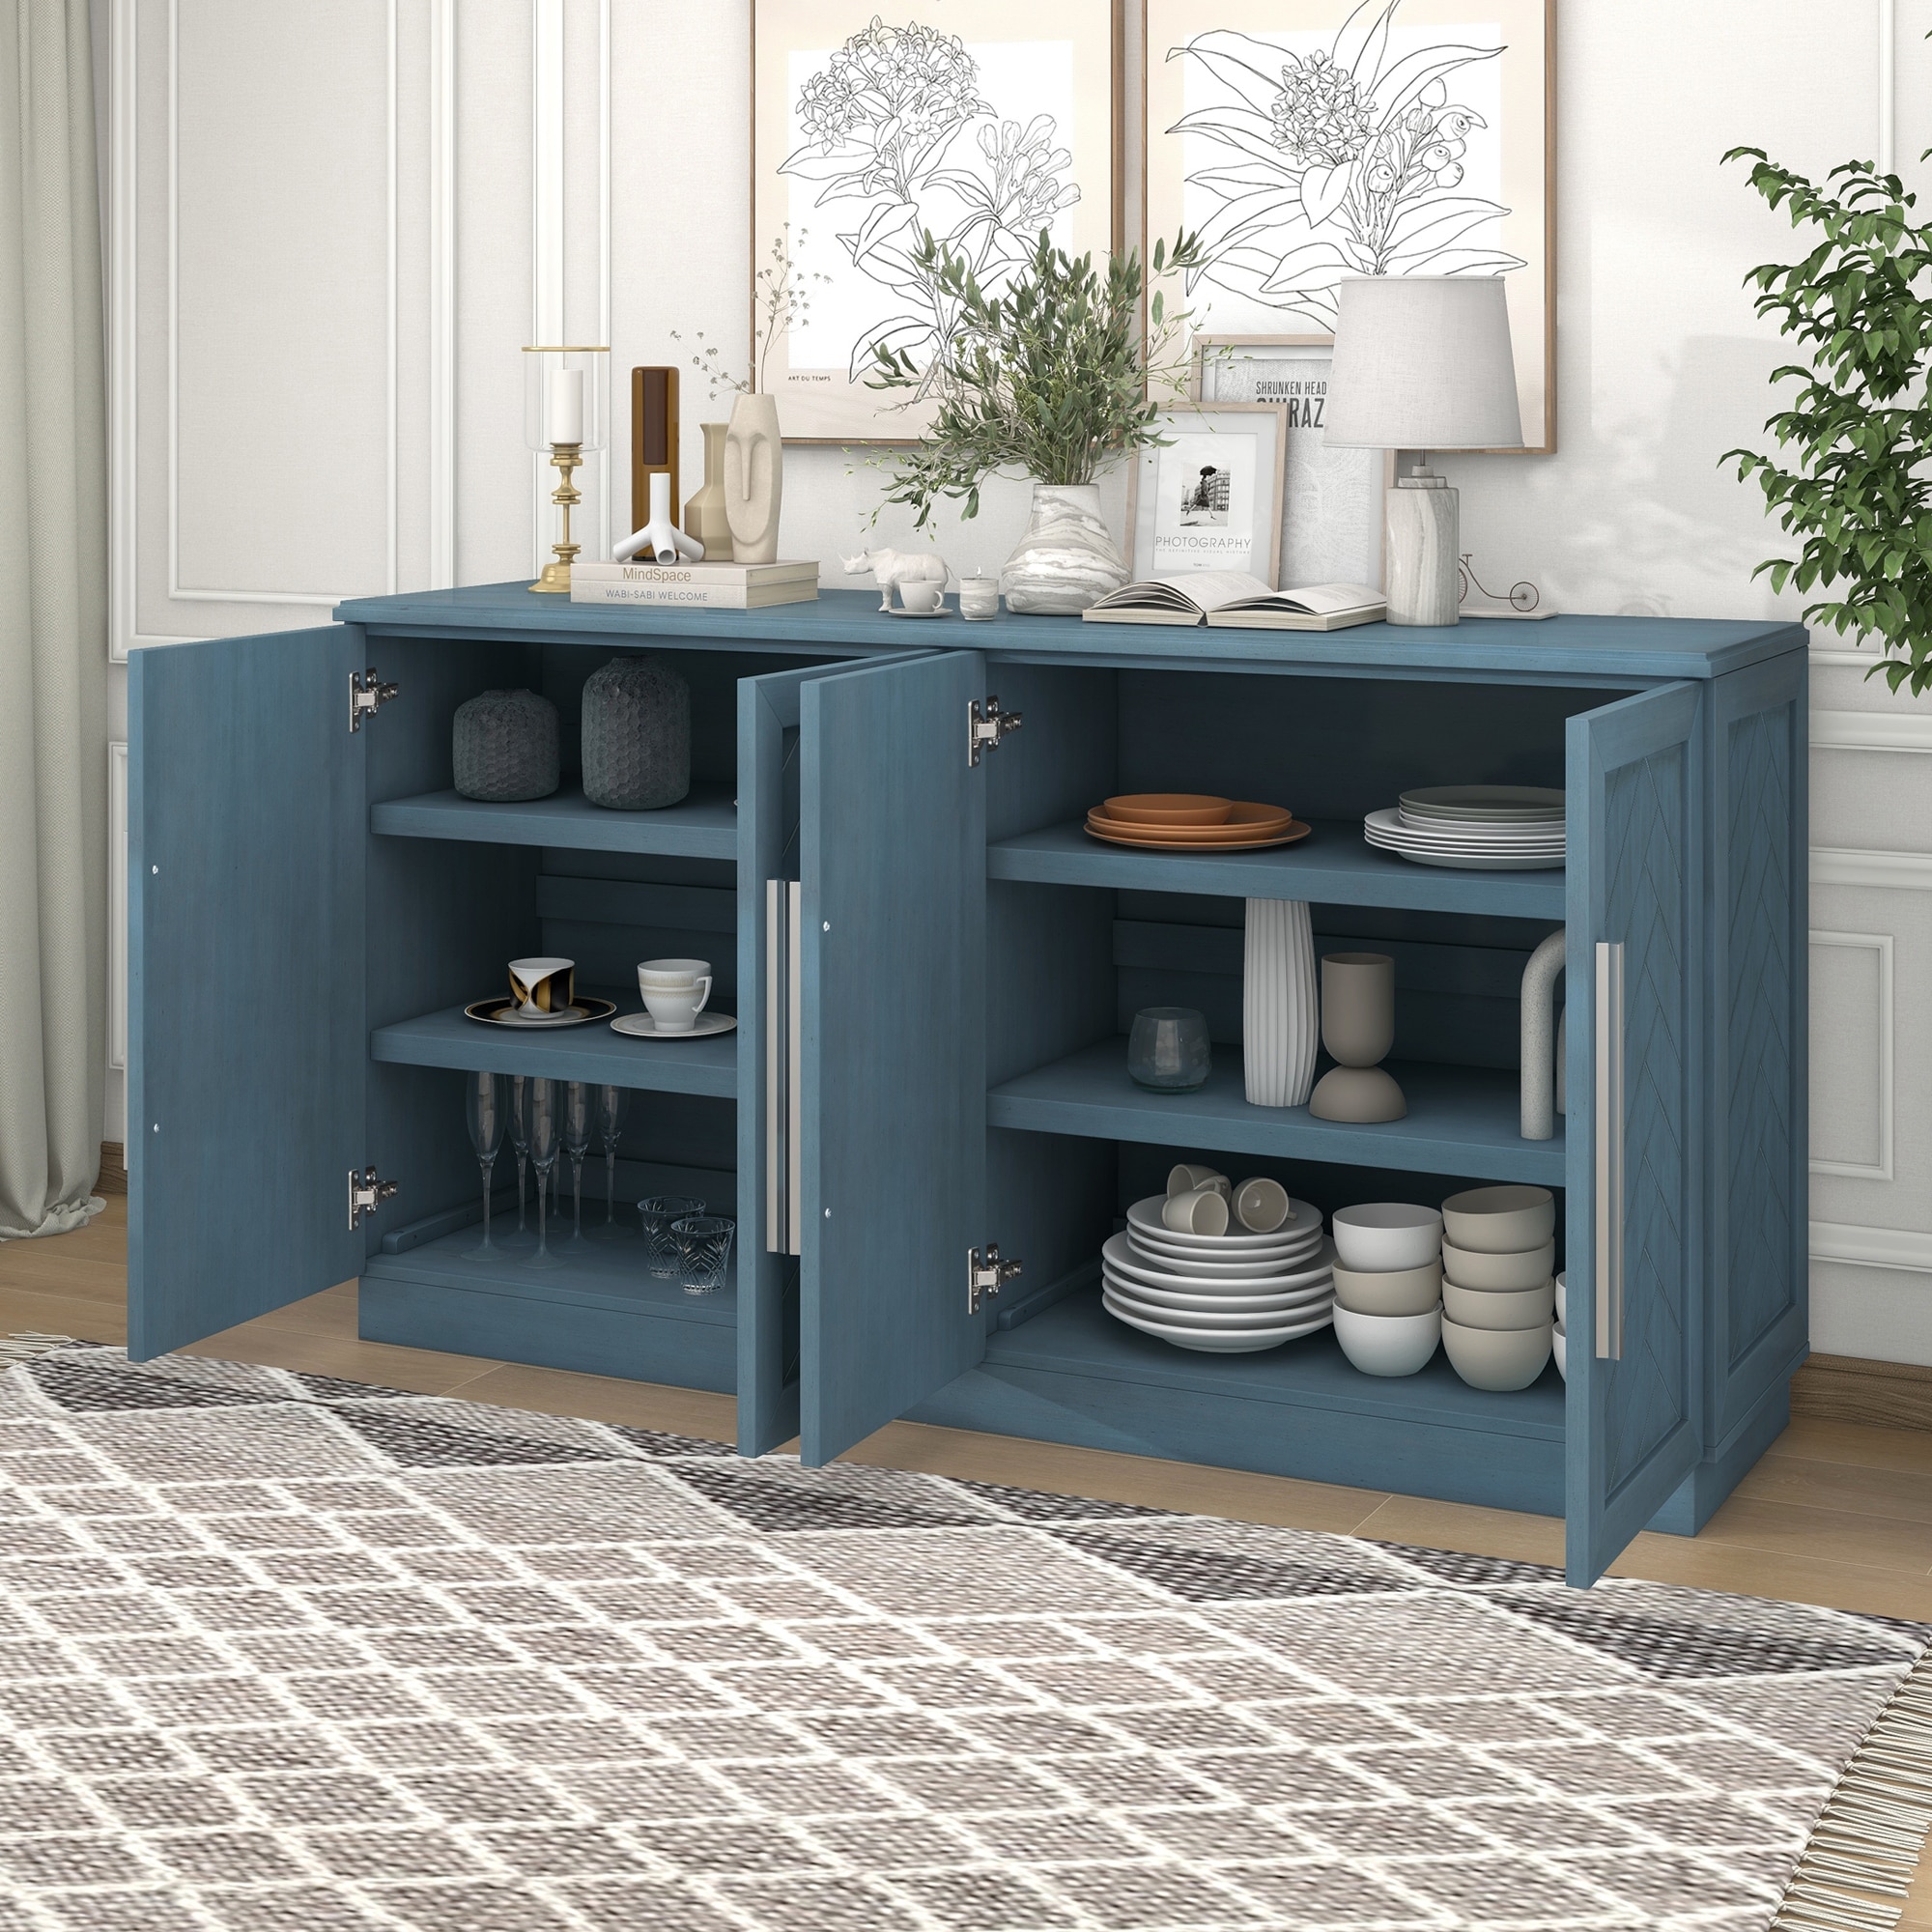 https://ak1.ostkcdn.com/images/products/is/images/direct/729cdceb319dfb7ff5fee9bbe392b8330dd7280e/Sideboard-with-4-Doors-Large-Storage-Space-Buffet-Cabinet.jpg